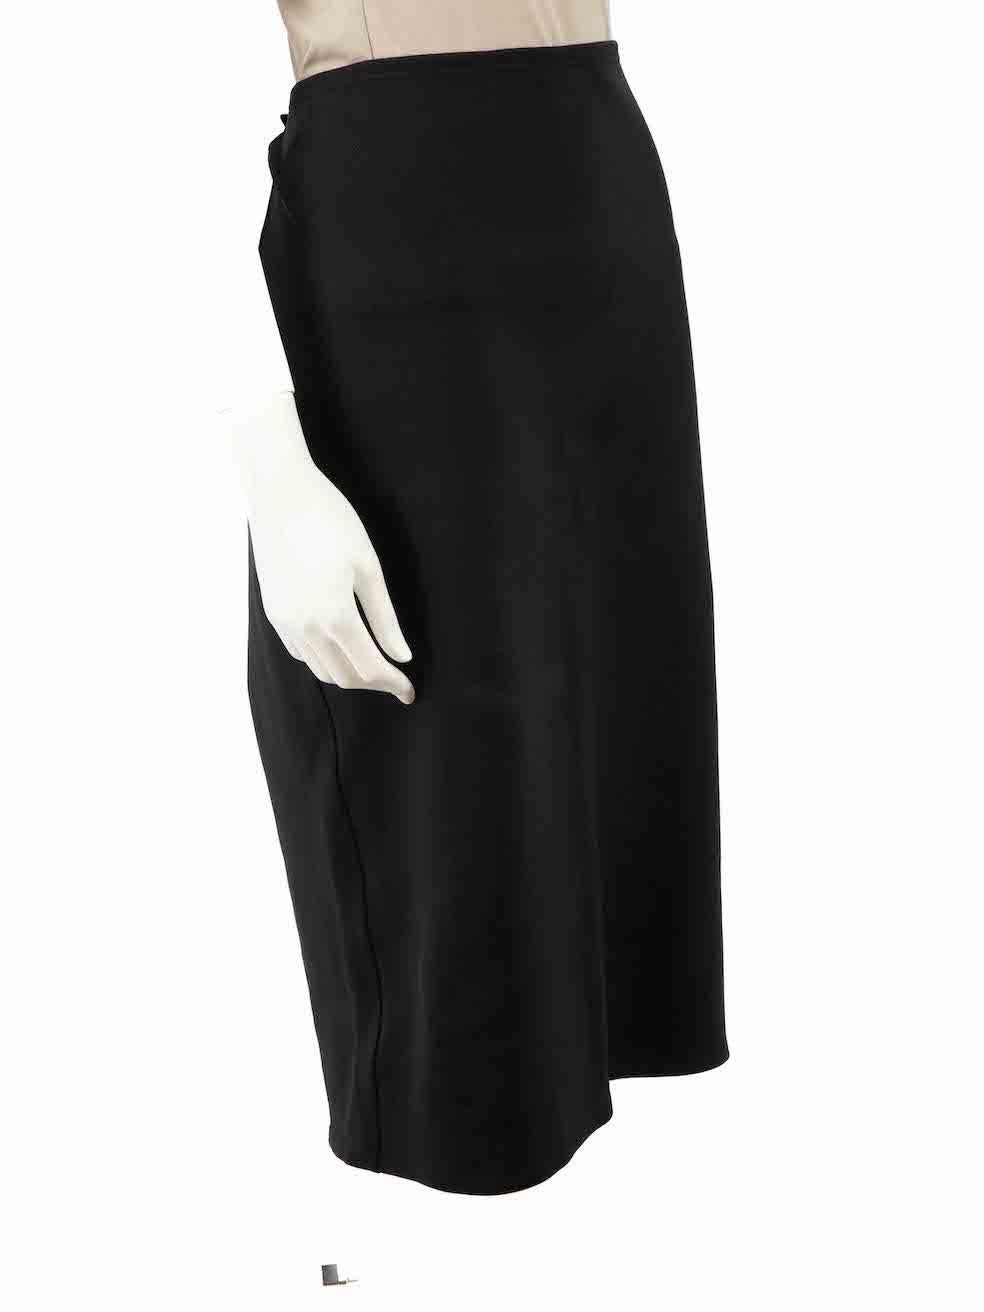 CONDITION is Never worn, with tags. No visible wear to skirt is evident on this new The Row designer resale item.
 
 Details
 Rabina
 Black
 Synthetic
 Pencil skirt
 Knee length
 Figure hugging fit
 Stretchy
 
 
 Made in USA
 
 Composition
 86%